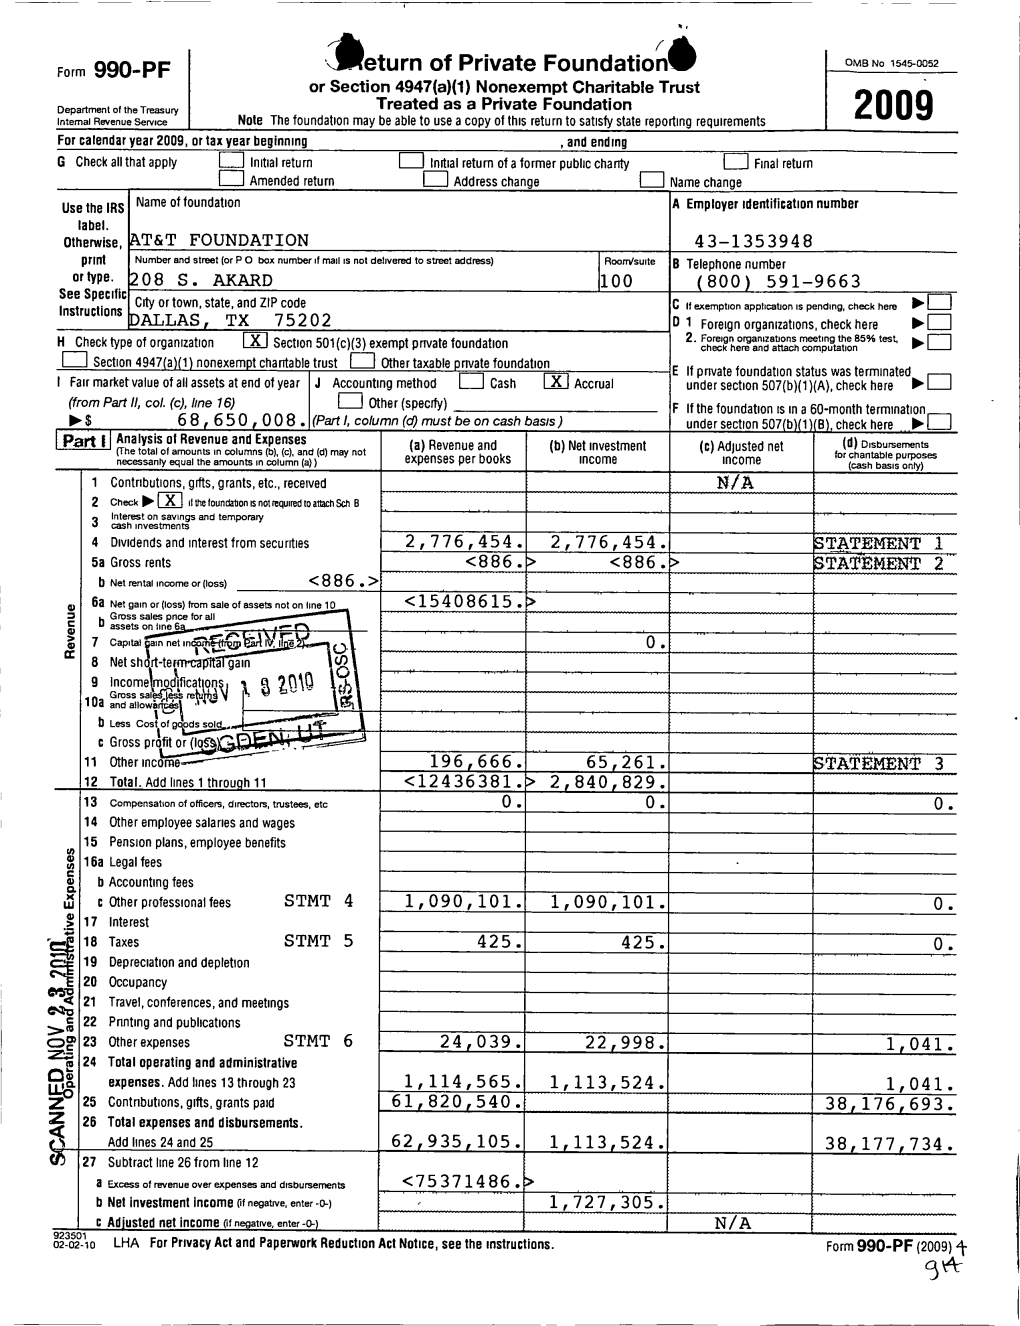 I -Eturn of Private Foundation Form 990-PF